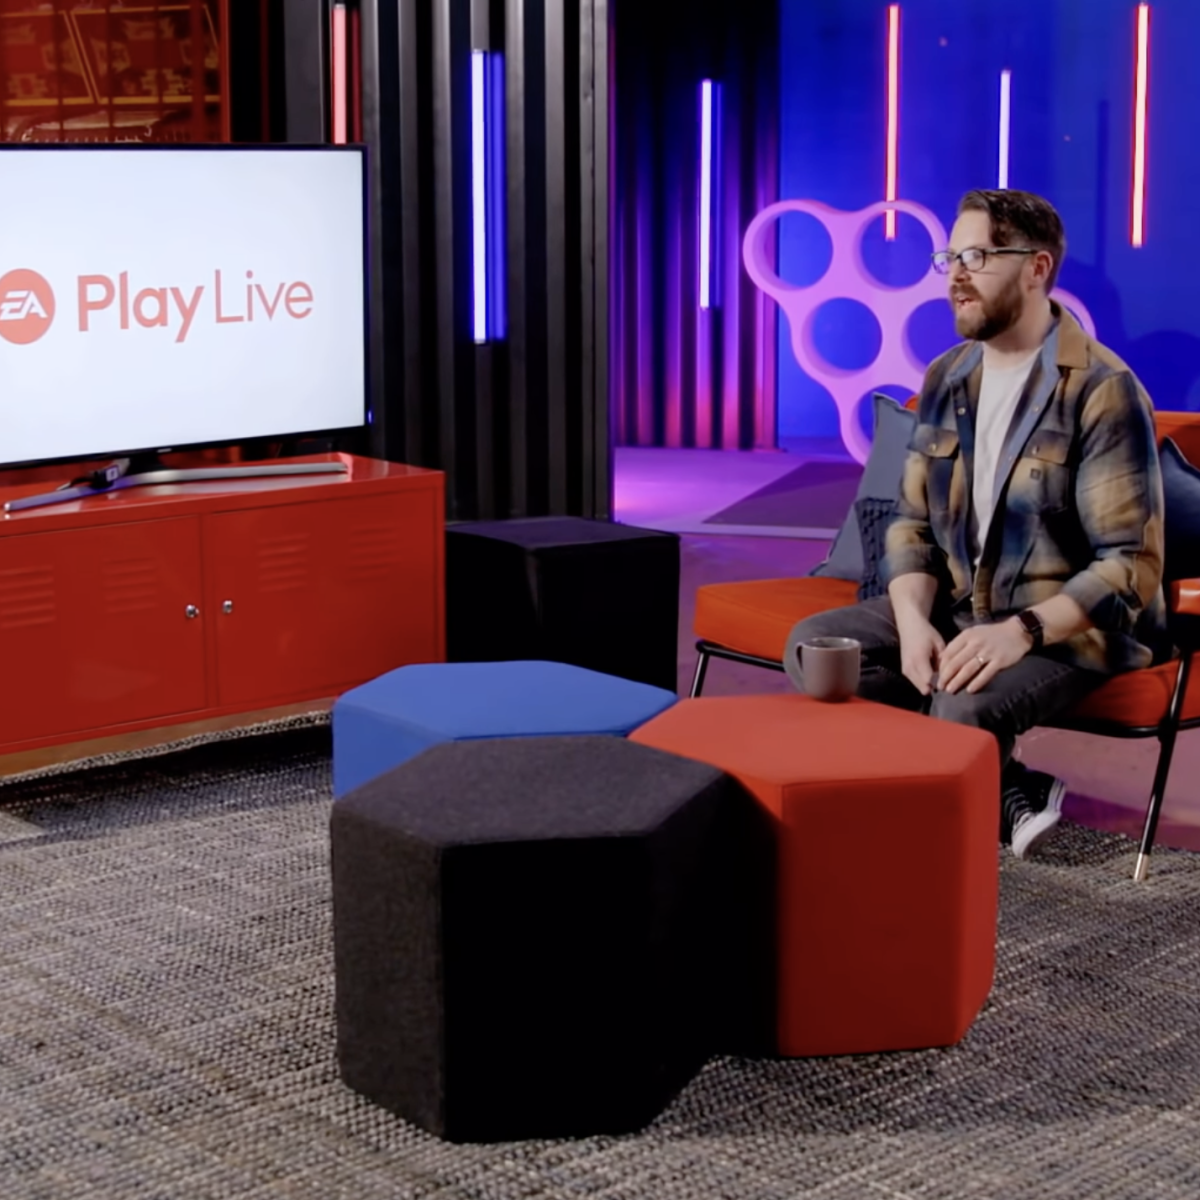 EA Play Live - Host - Live Streaming Content